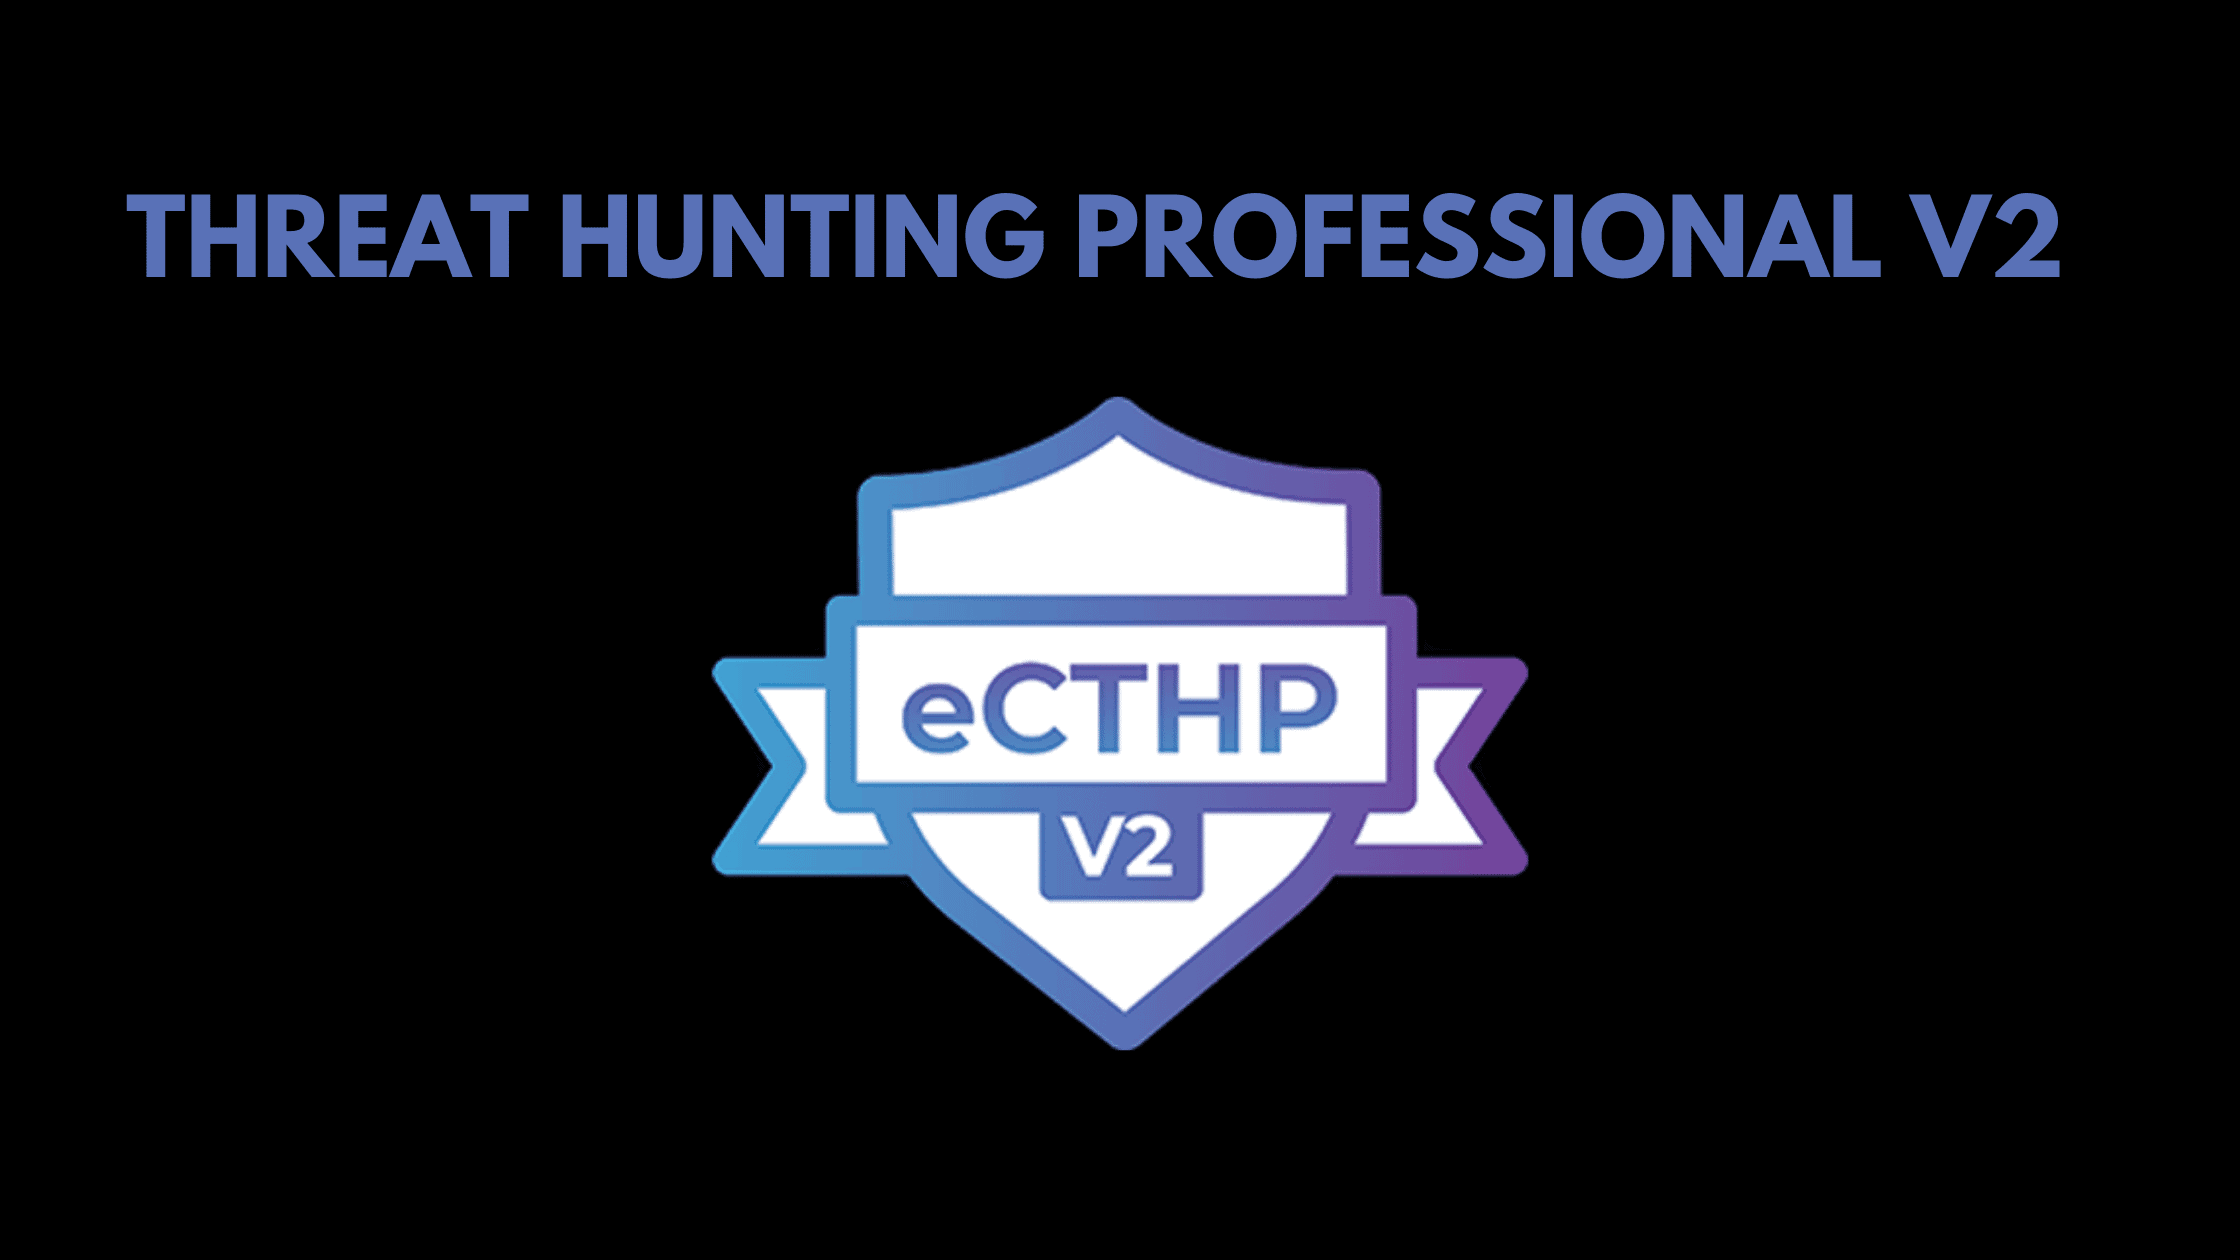 How To Prepare For The Ecthpv2 Certification 1